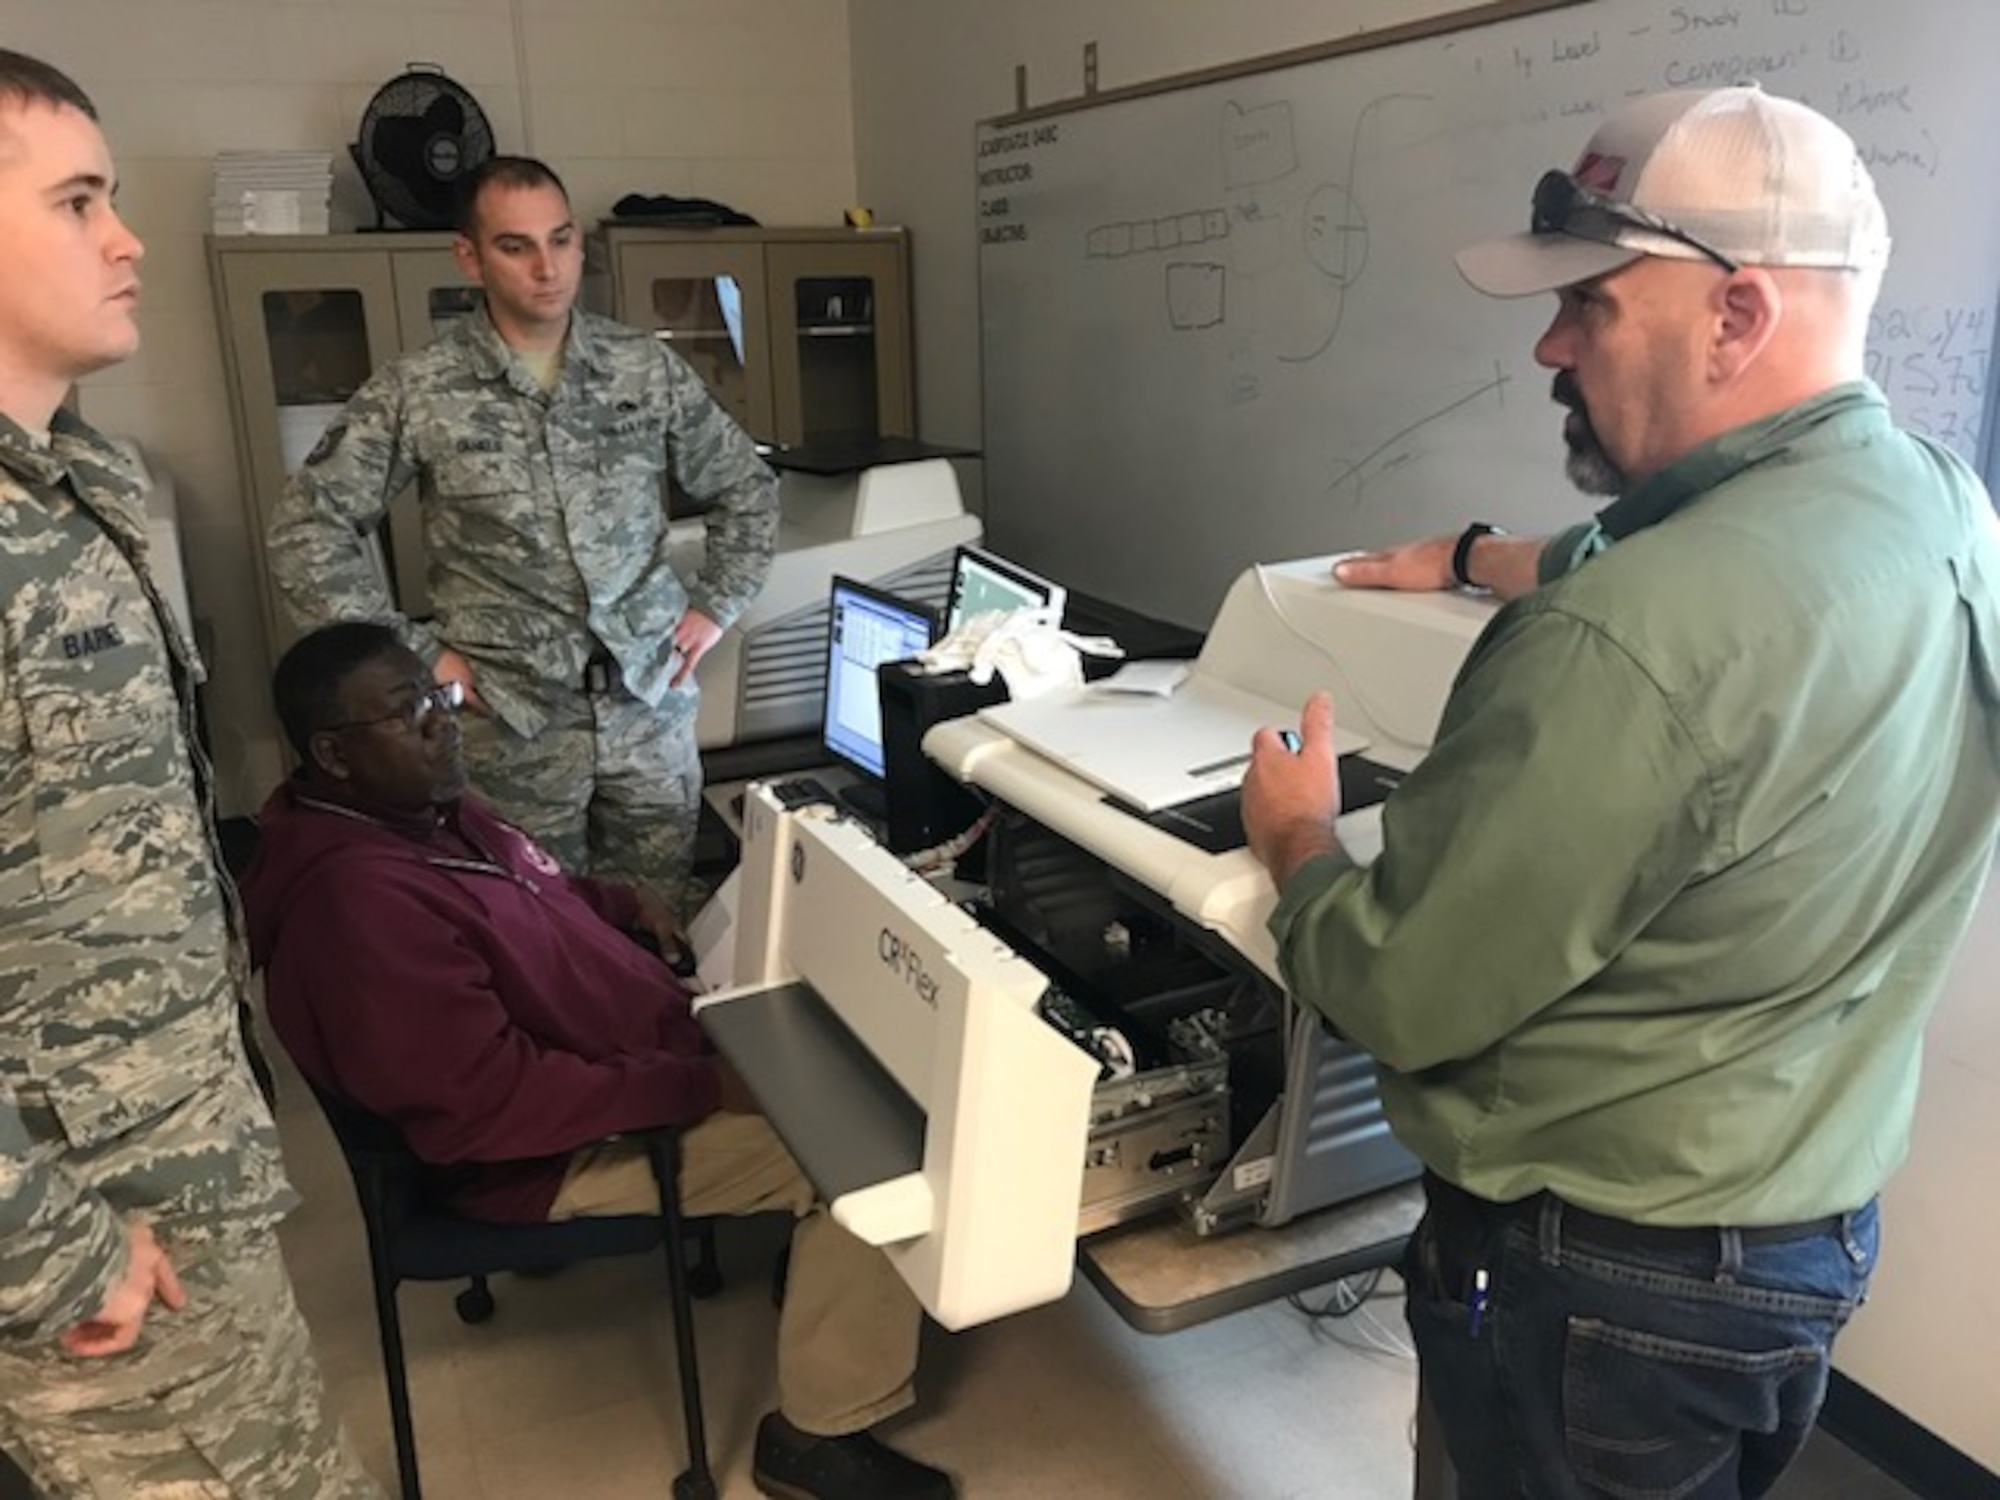 Kevin McClain, contract nondestructive testing instructor, explains how to clear a jammed image scanner from a computed radiography system to visiting Nondestructive Inspection Instructor, Tech. Sgt. Matthew Barnes (left); Tech. Sgt. Clifford Daniels, Military NDI Instructor supervisor (rear); and Bobby Britton, Civilian NDI Instructor supervisor (seated) during instructor qualification training held at the 359th Training Squadron Detachment One at Naval Air Station Pensacola, Florida Jan. 24, 2018. New digital technology will replace the X-ray film used by NDI technicians over the next several years and impact every airframe the Air Force flies, saving money, reducing hazardous materials and improving operational capabilities. (Courtesy photo)